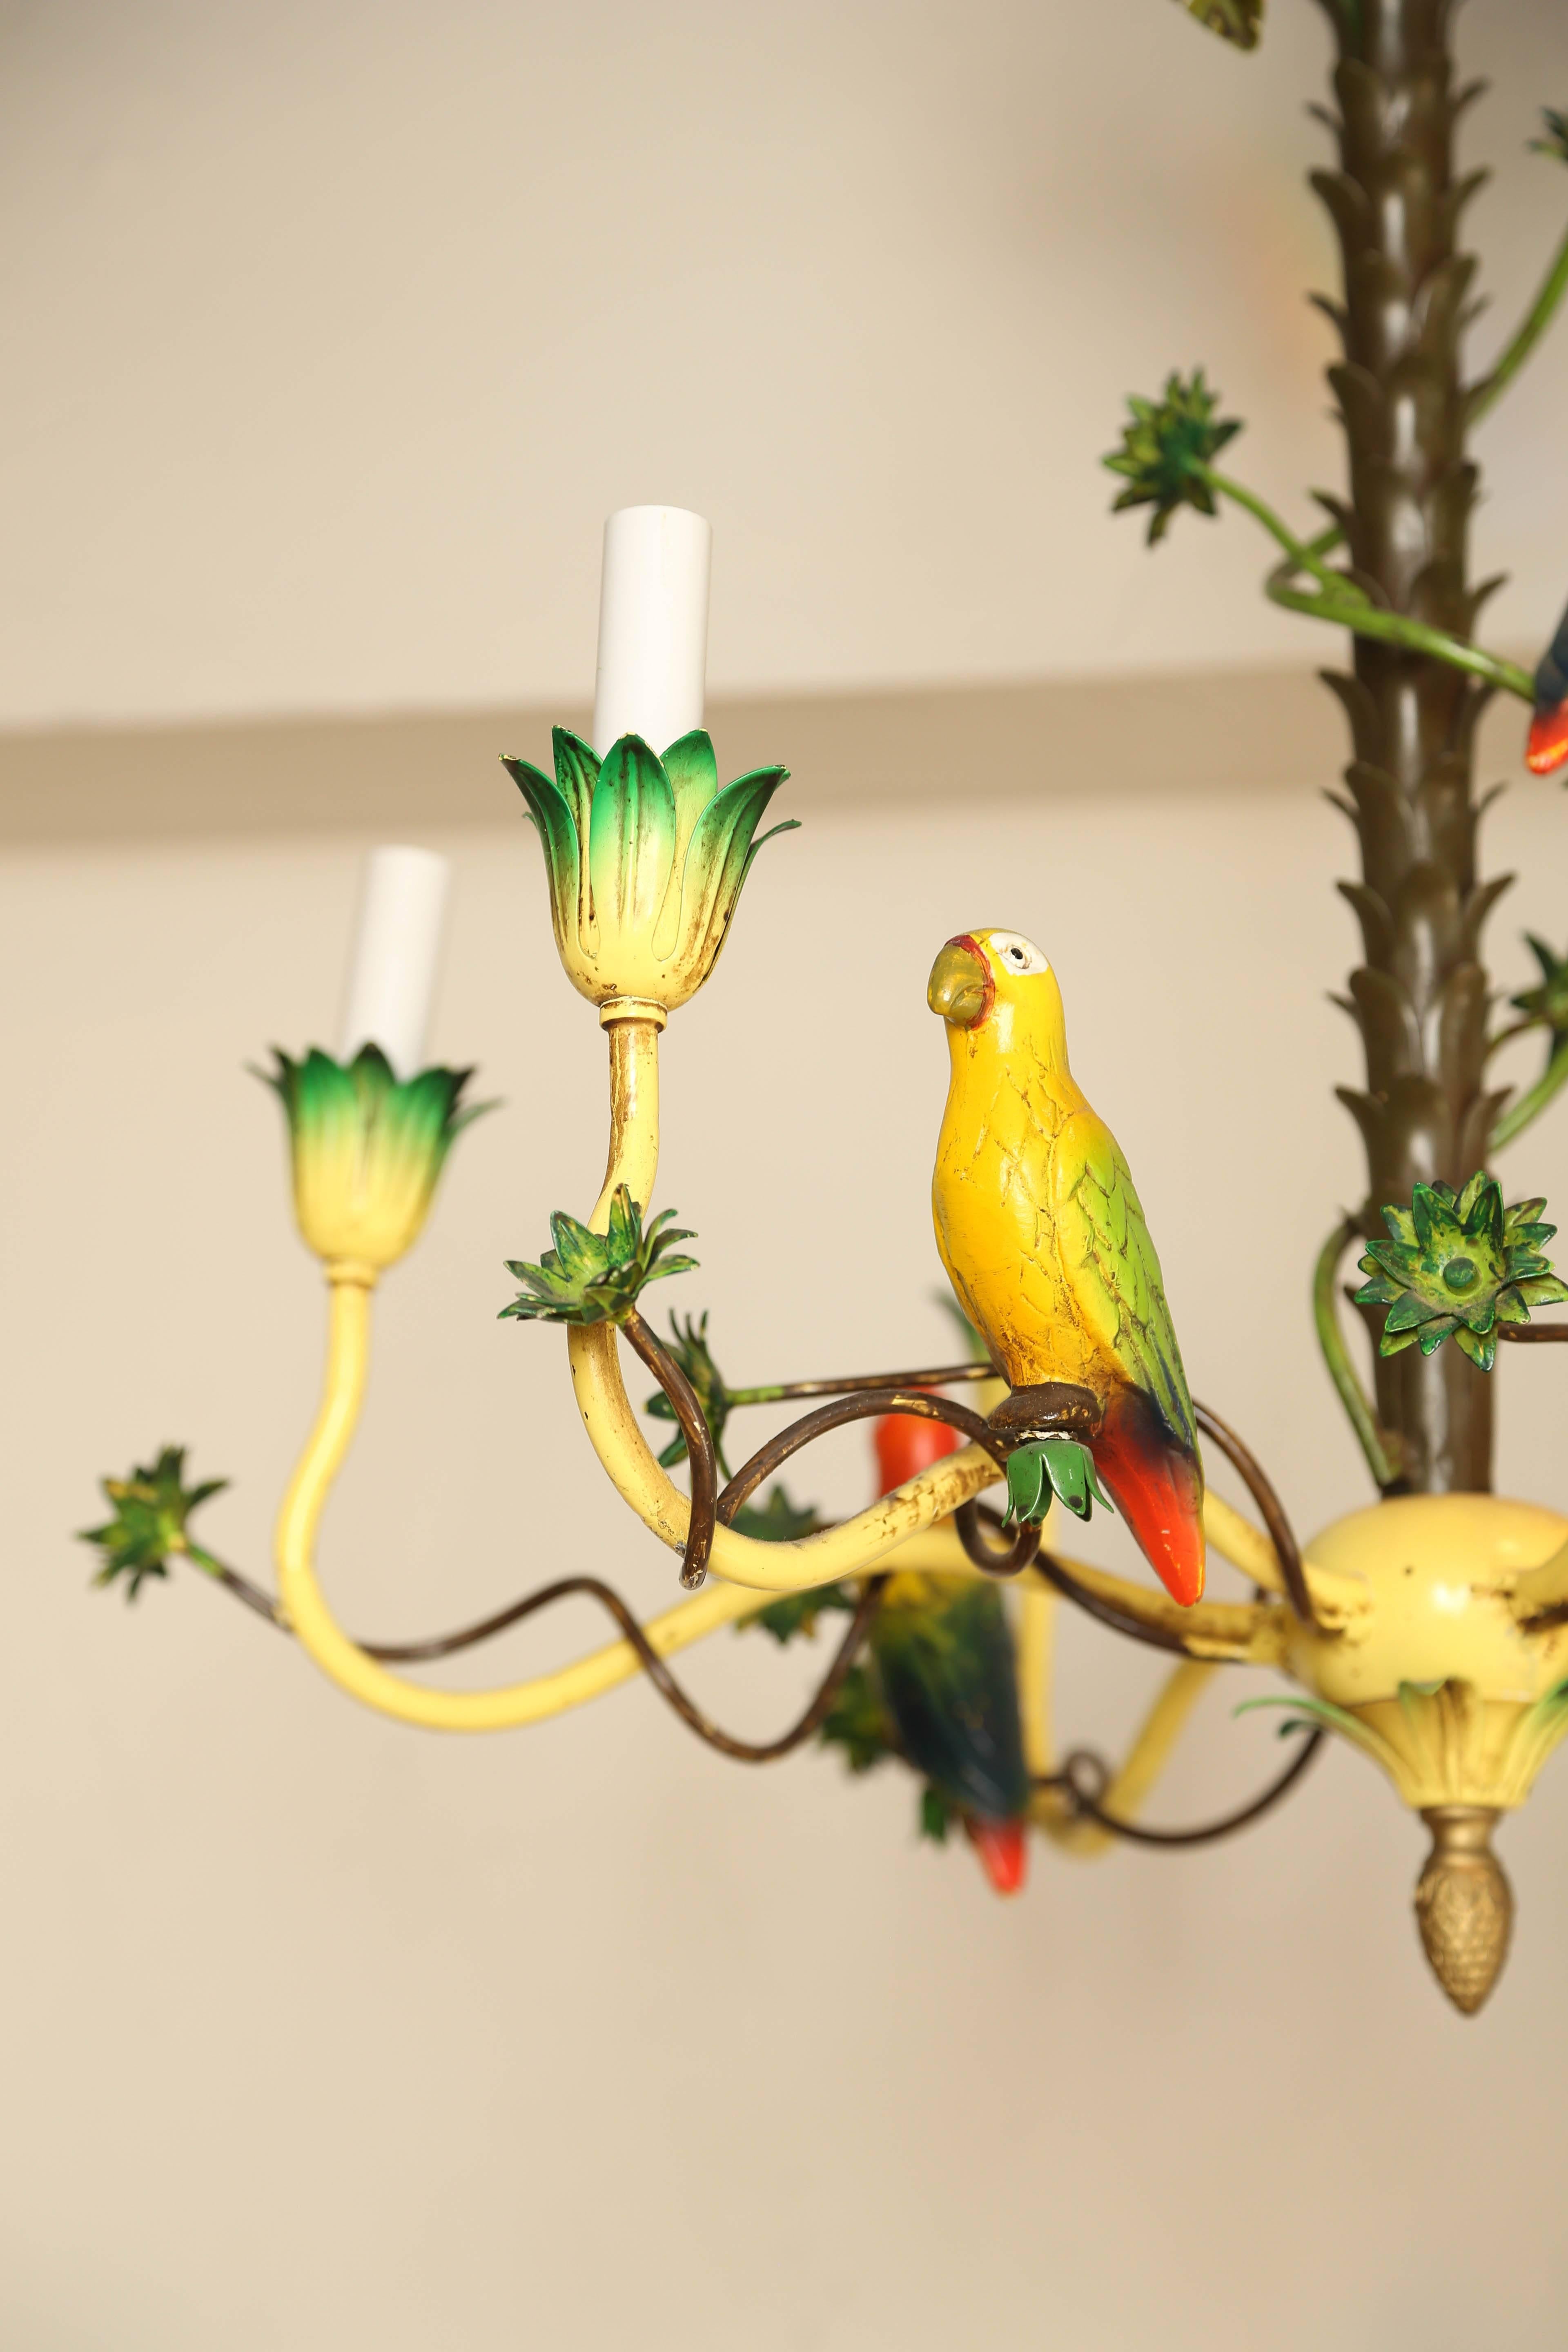 Whimsical and colorful Italian tole fixture of a palm tree with birds.